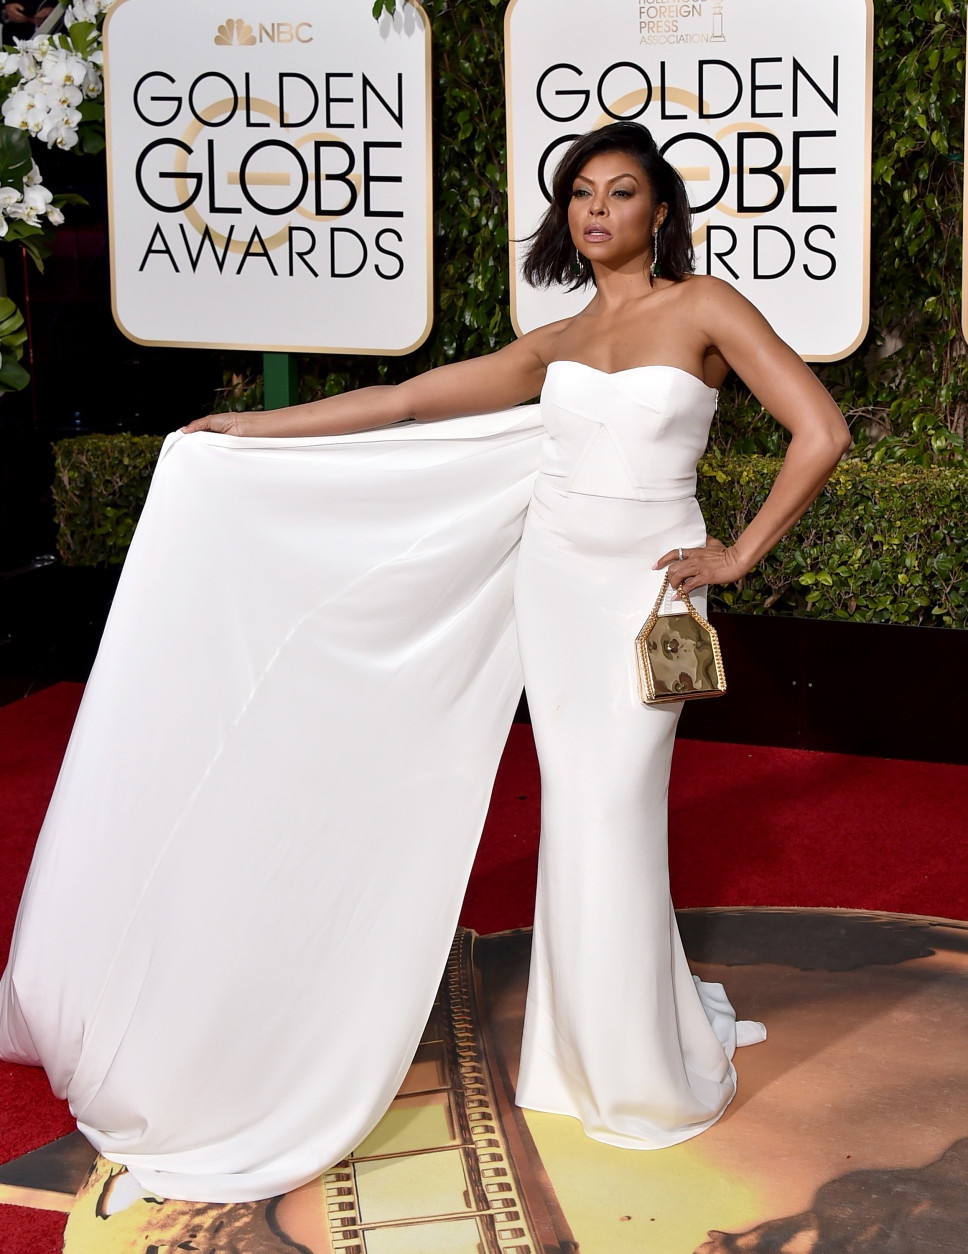 Taraji P. Henson arrives at the 73rd annual Golden Globe Awards on Sunday, Jan. 10, 2016, at the Beverly Hilton Hotel in Beverly Hills, Calif. (Photo by Jordan Strauss/Invision/AP)